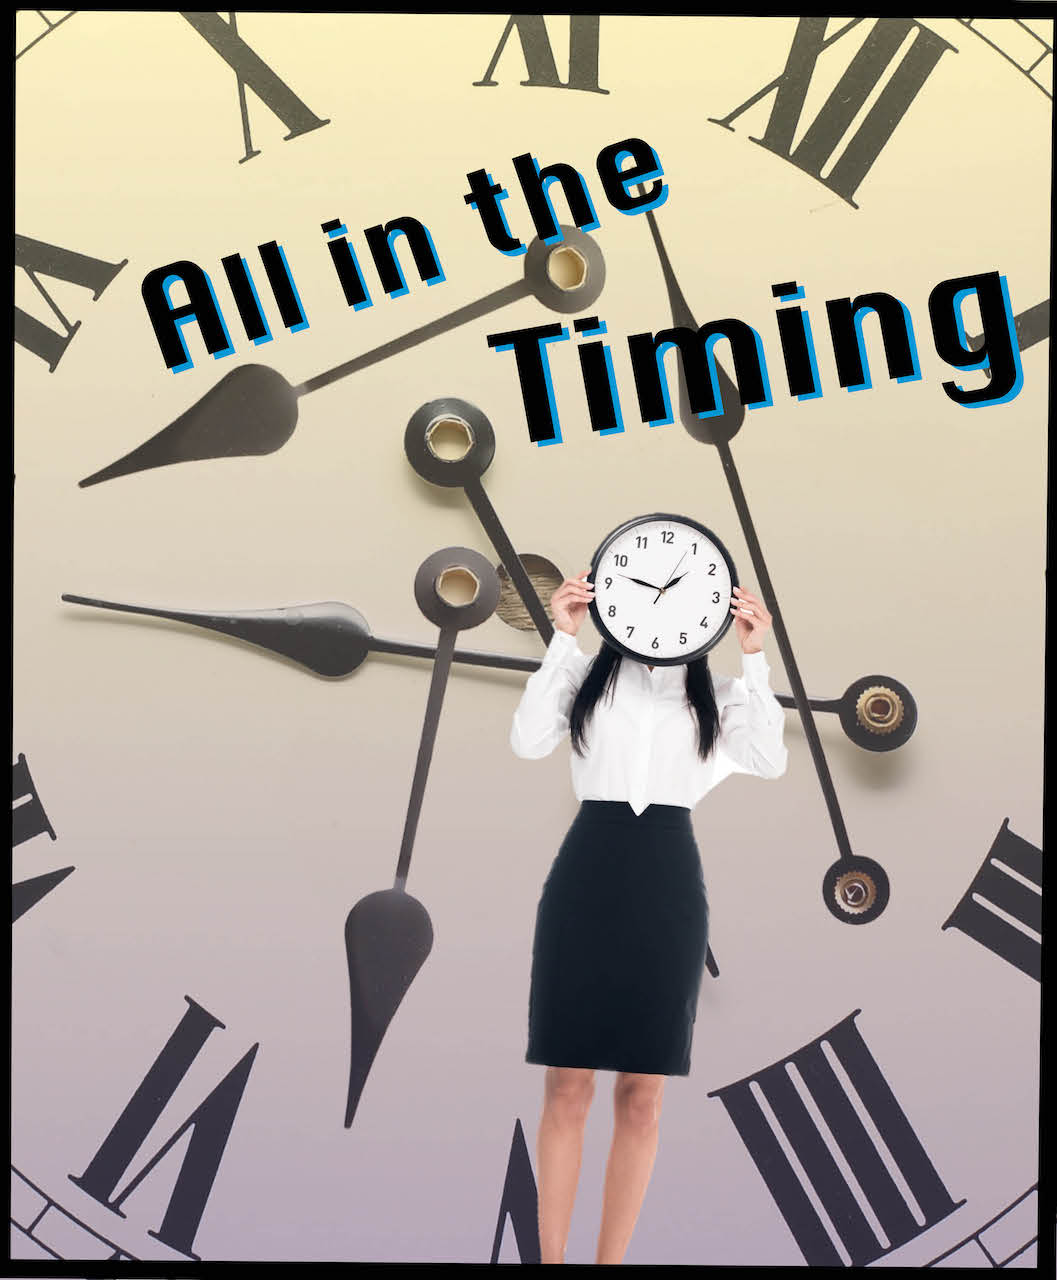 Promotional poster for "All in the Timing"